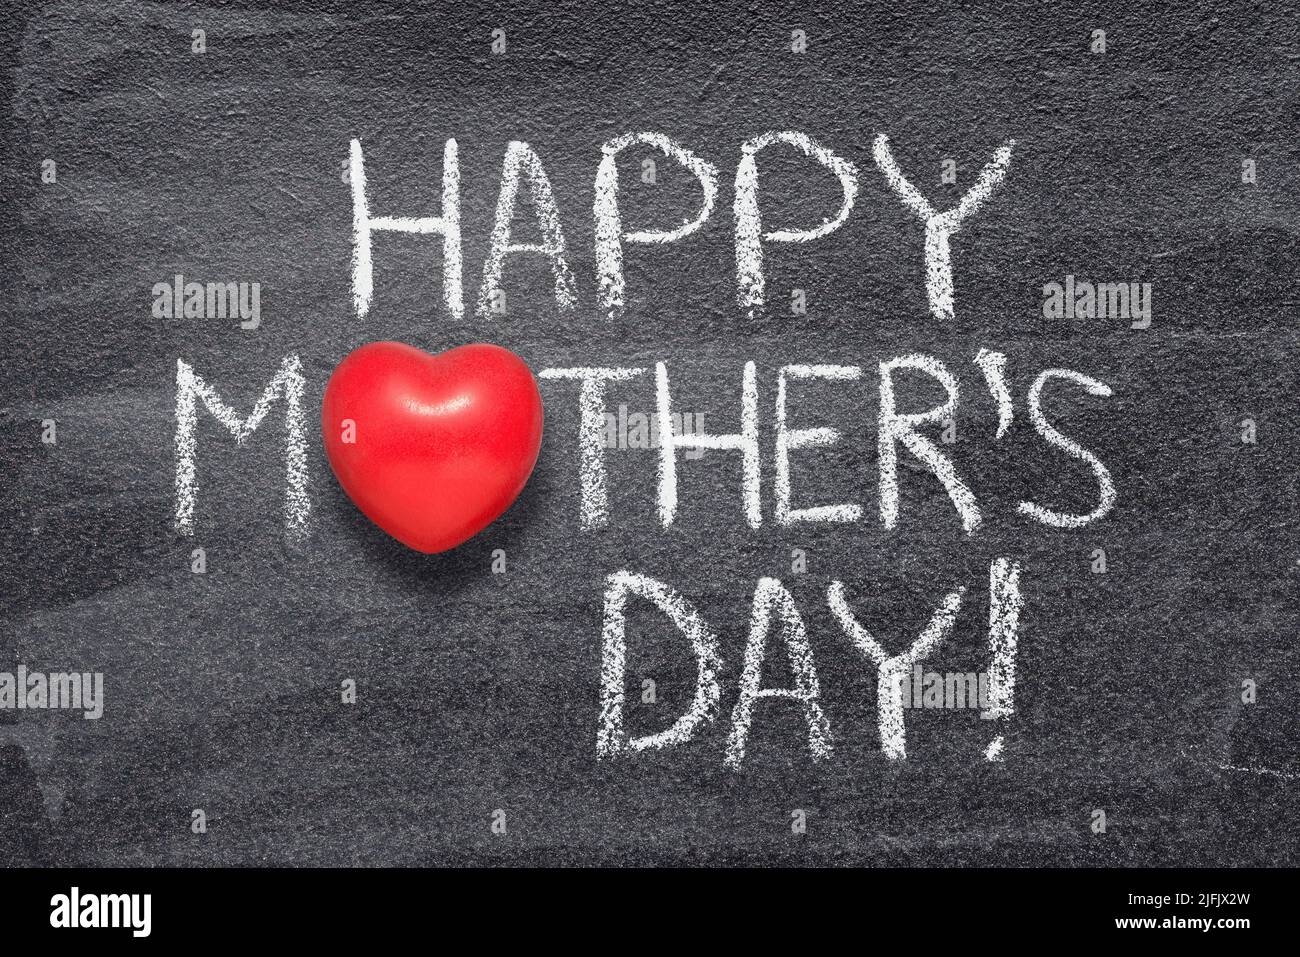 happy mother's day exclamation written on chalkboard with red heart symbol Stock Photo